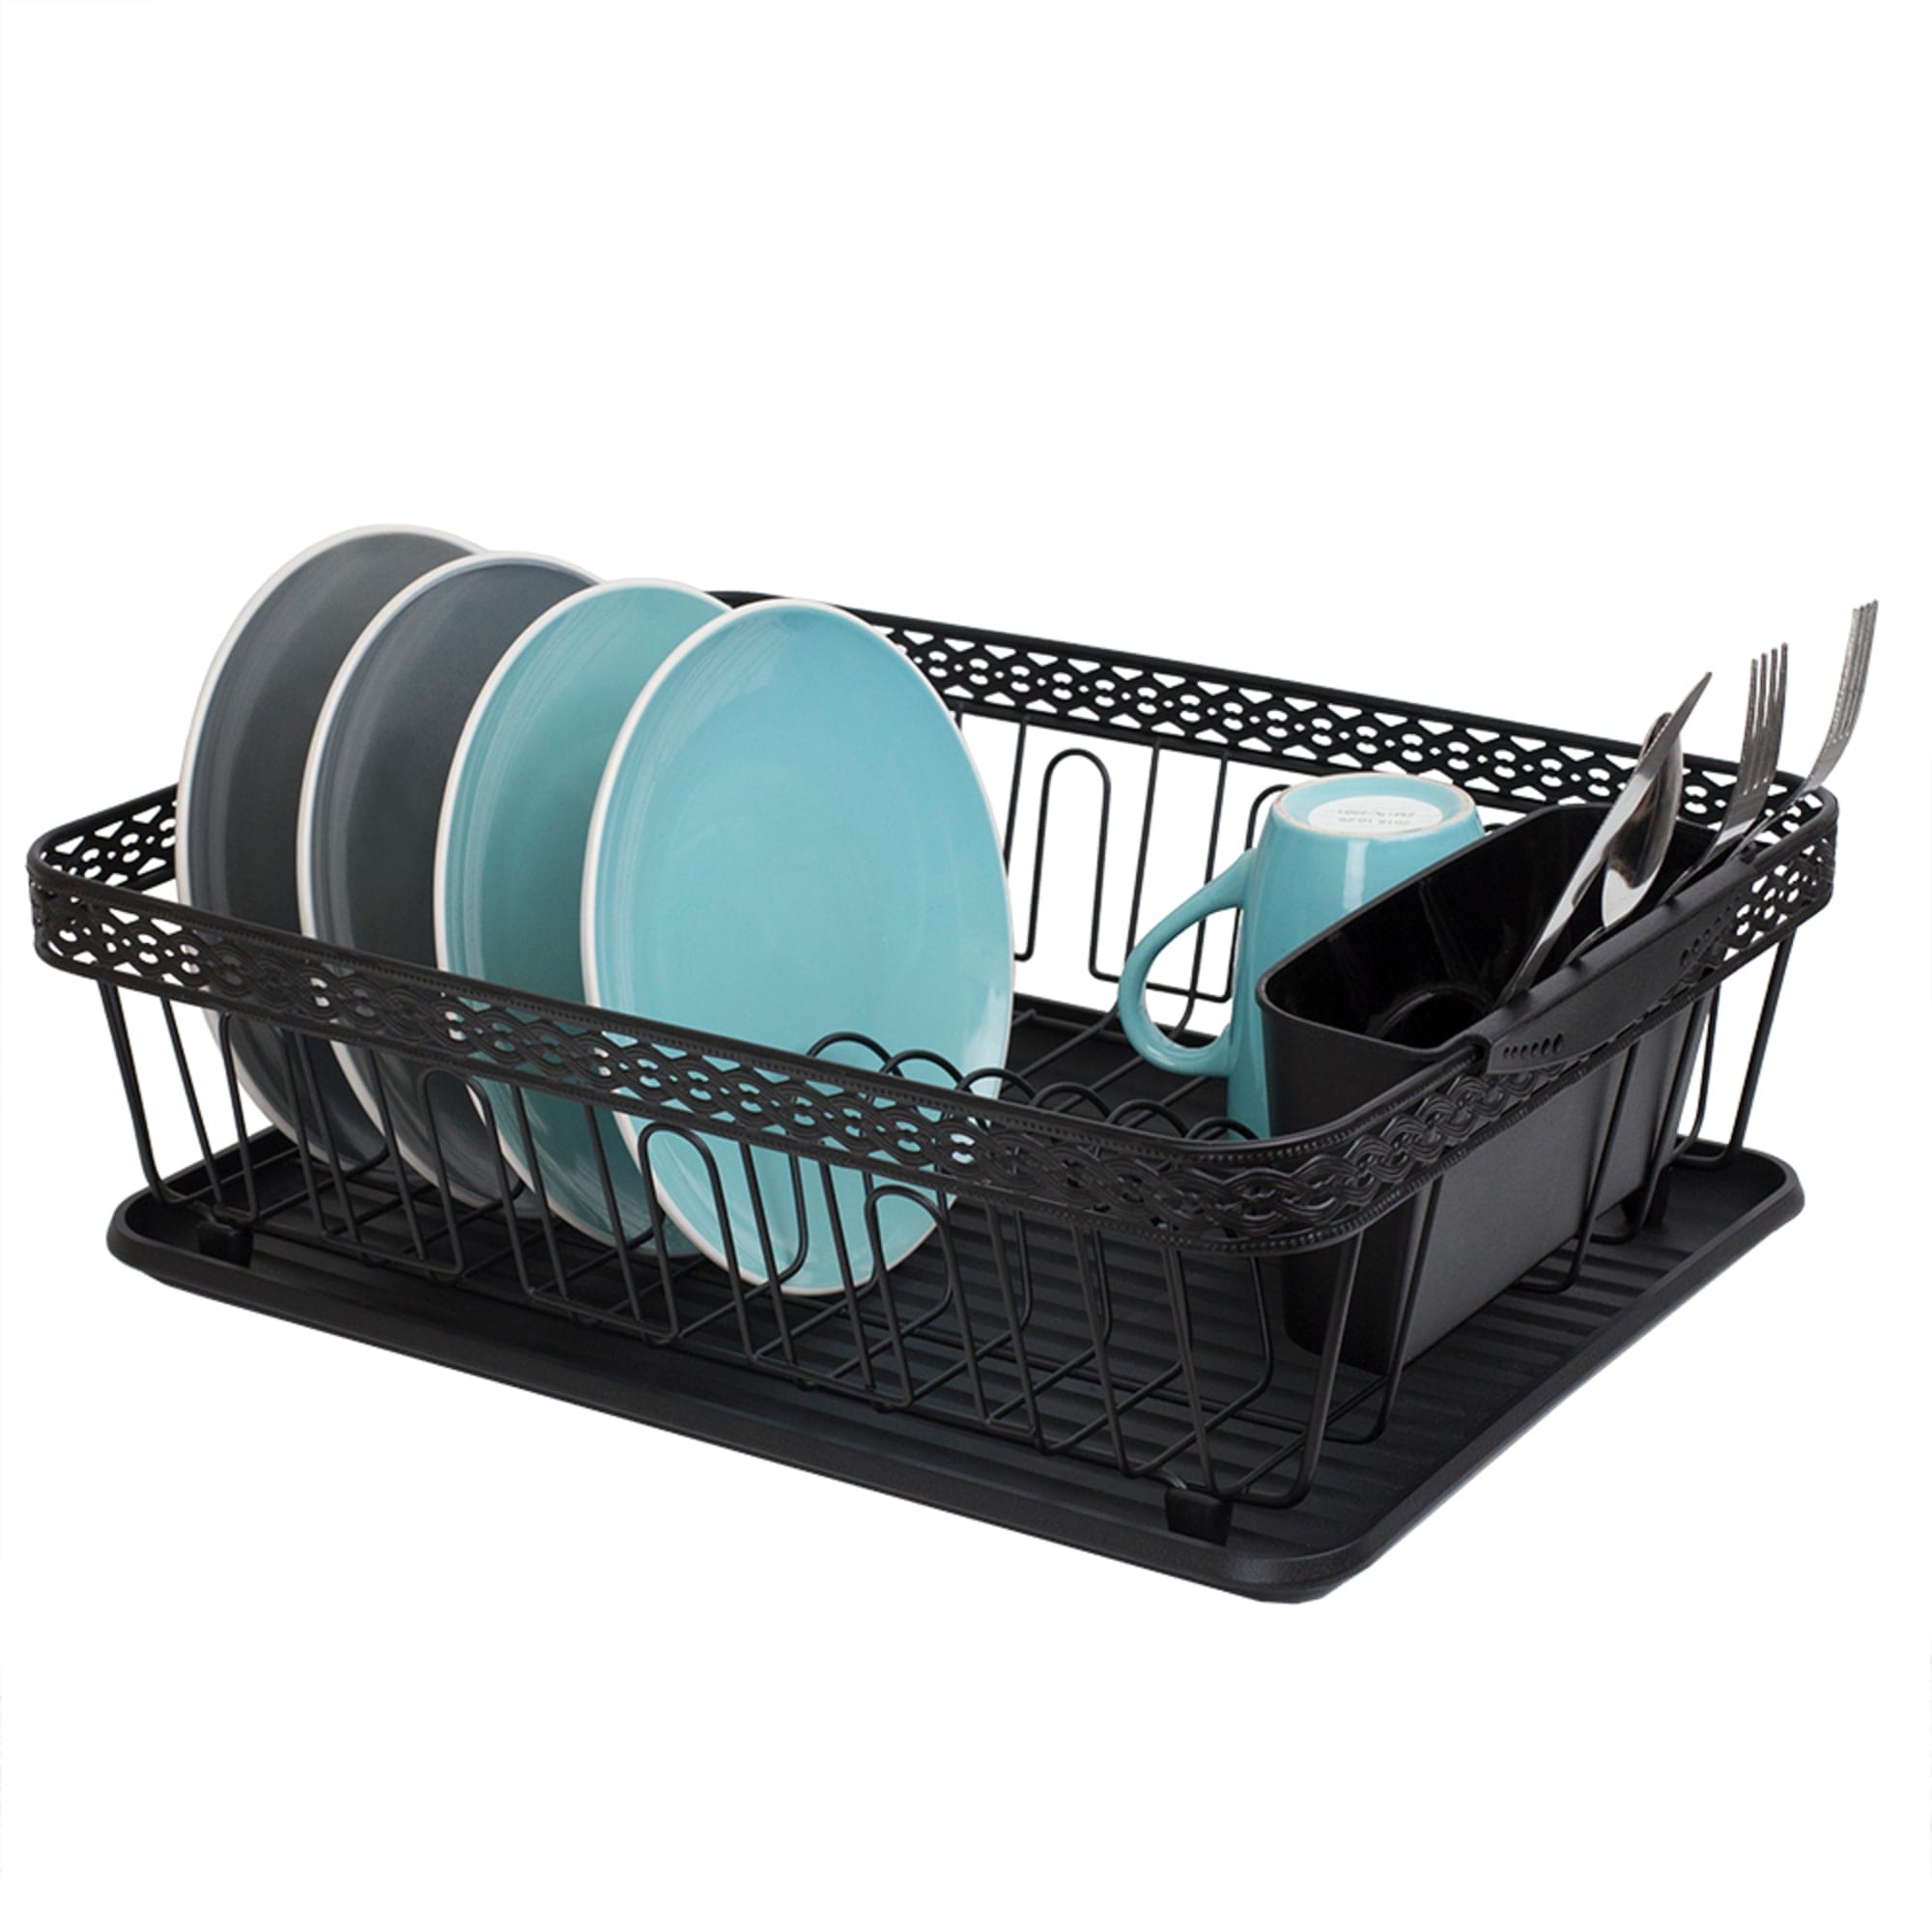 Home Basics 3 Piece Decorative Wire Dish Rack, Black $20.00 EACH, CASE PACK OF 6